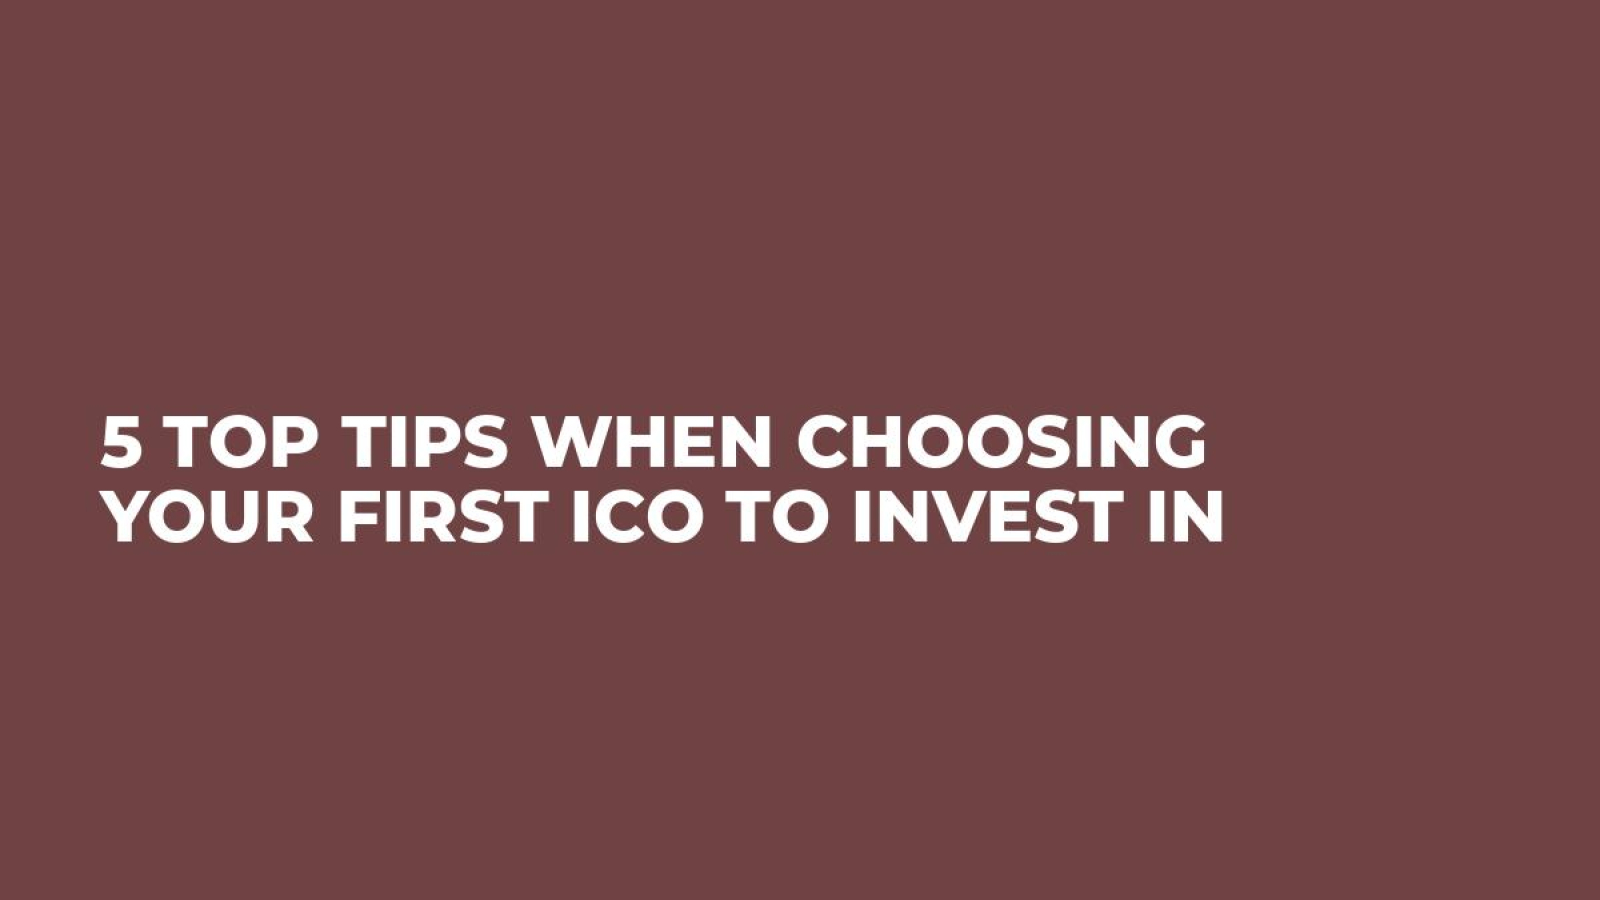 5 Top Tips When Choosing Your First ICO To Invest In